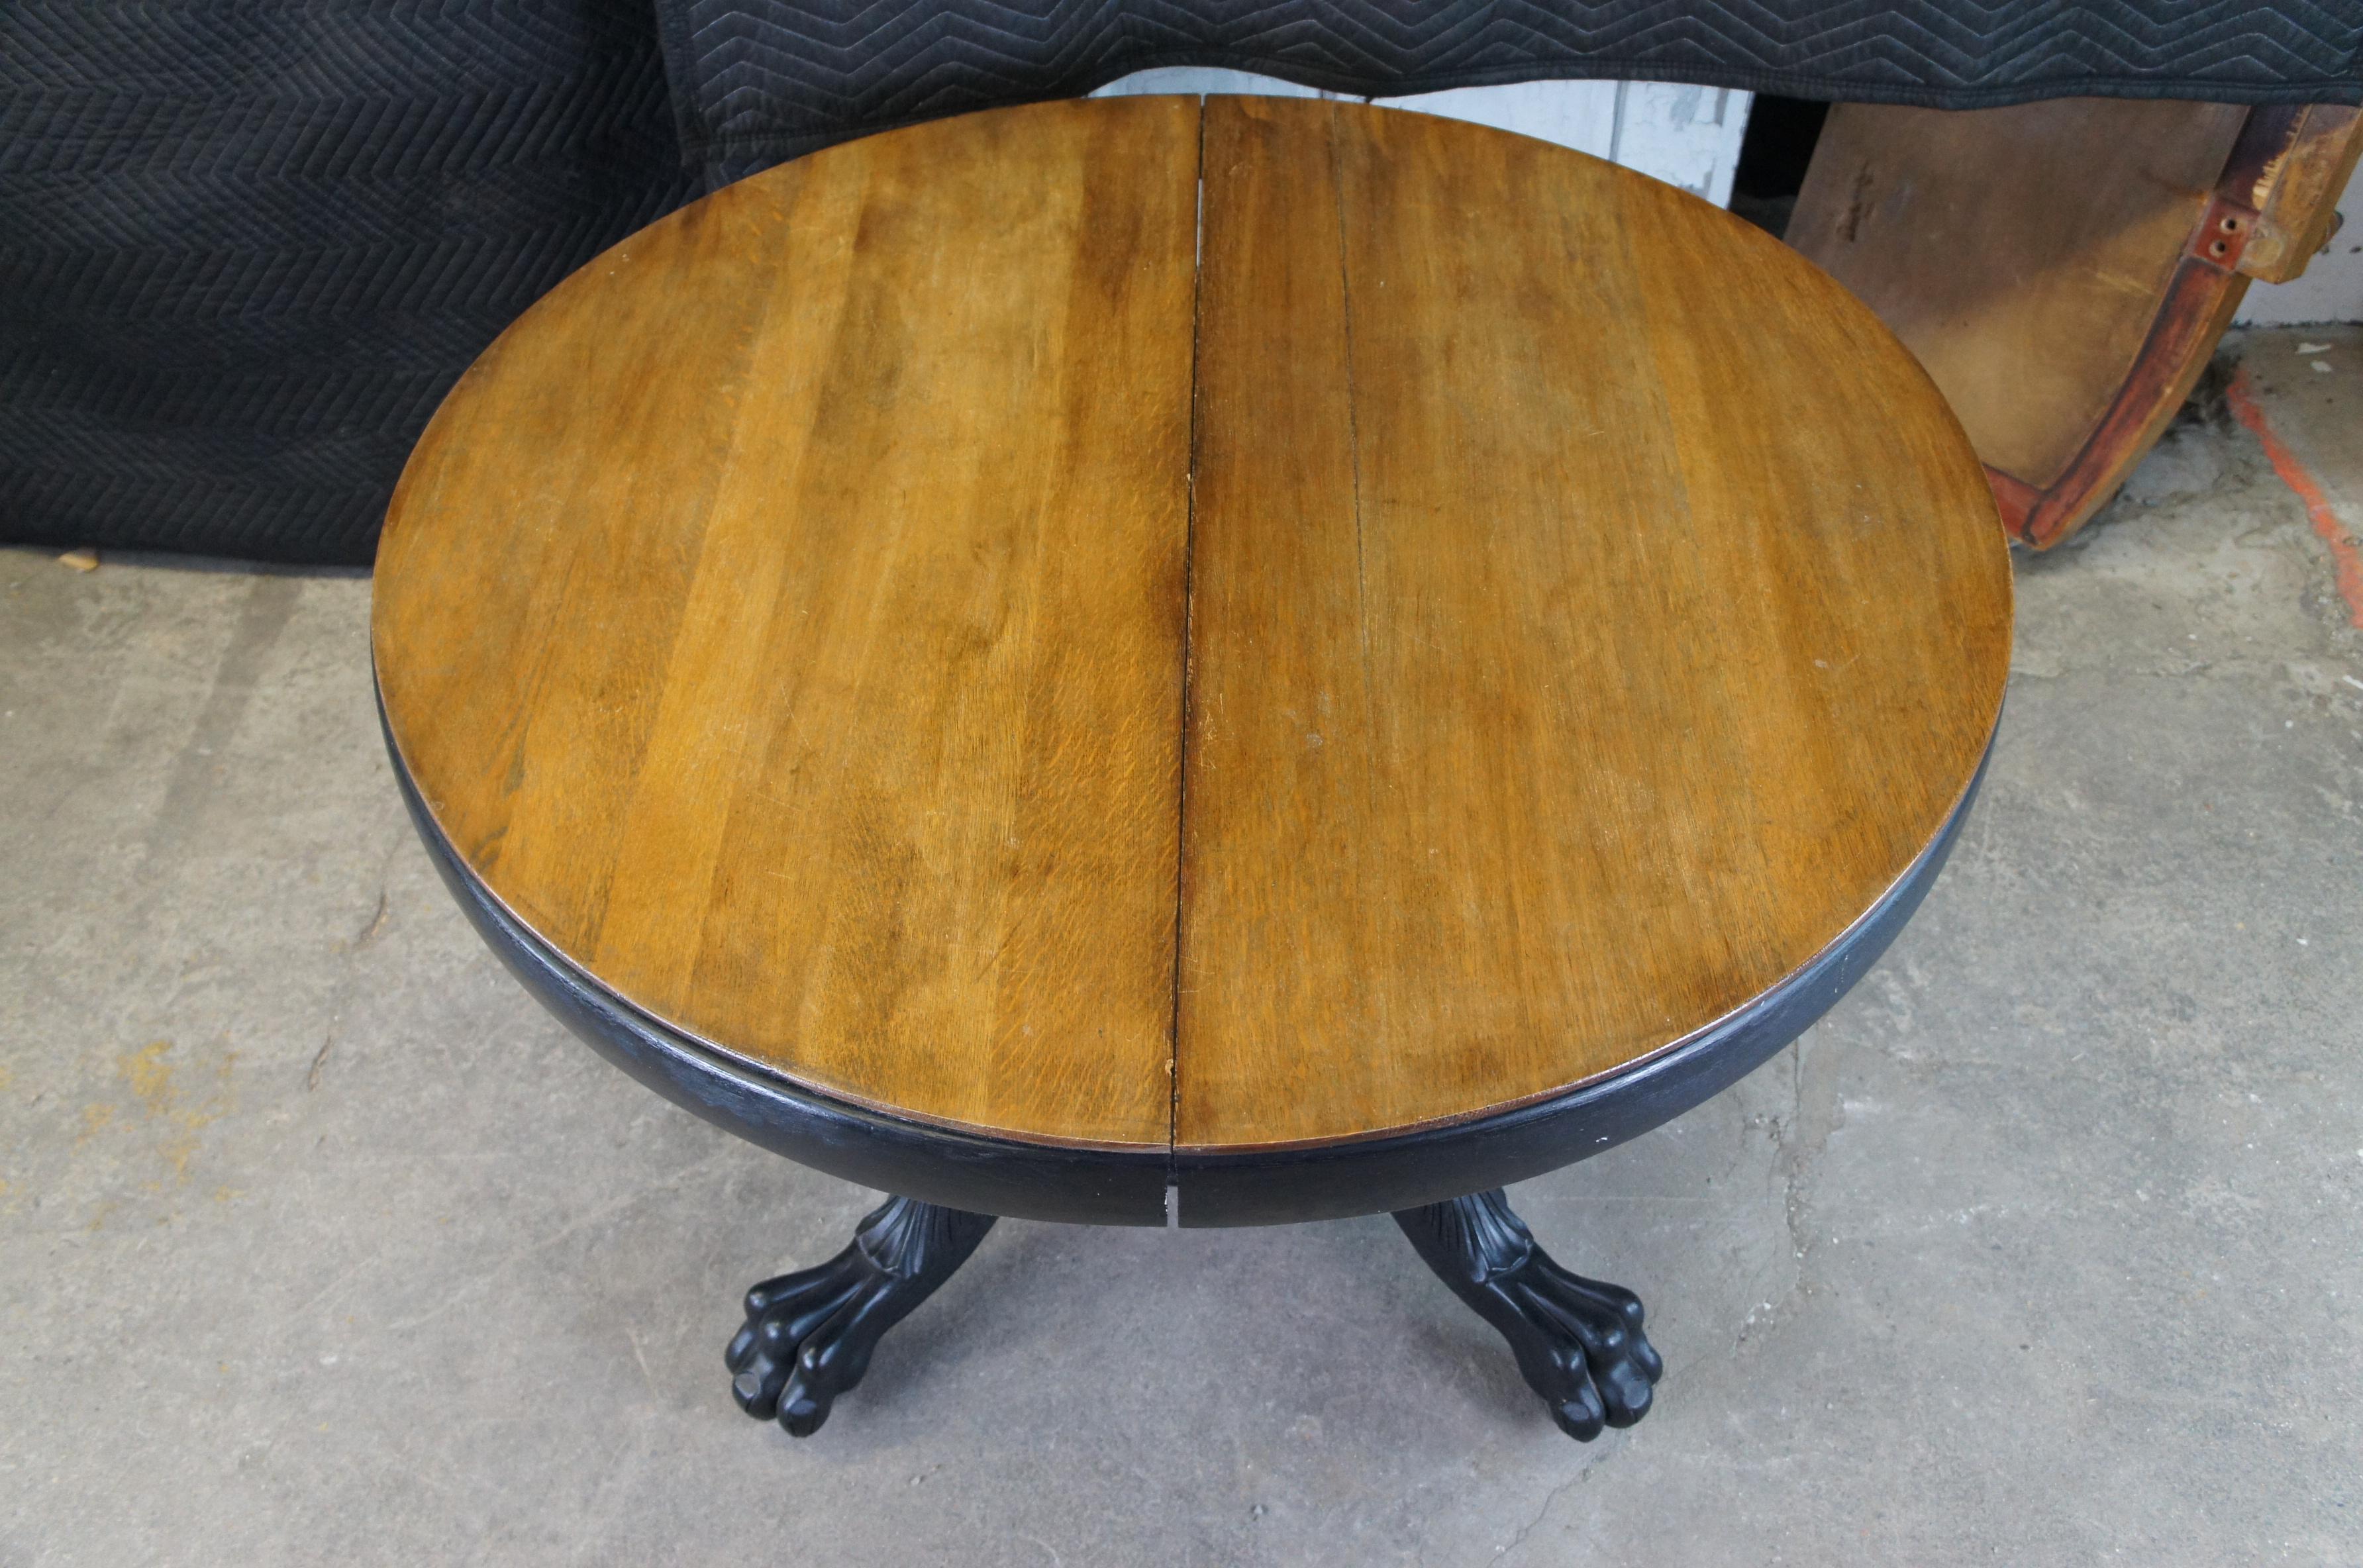 19th Century Antique Victorian Round Oak Gothic Revival Dining Table Figural Claw Foot Lion